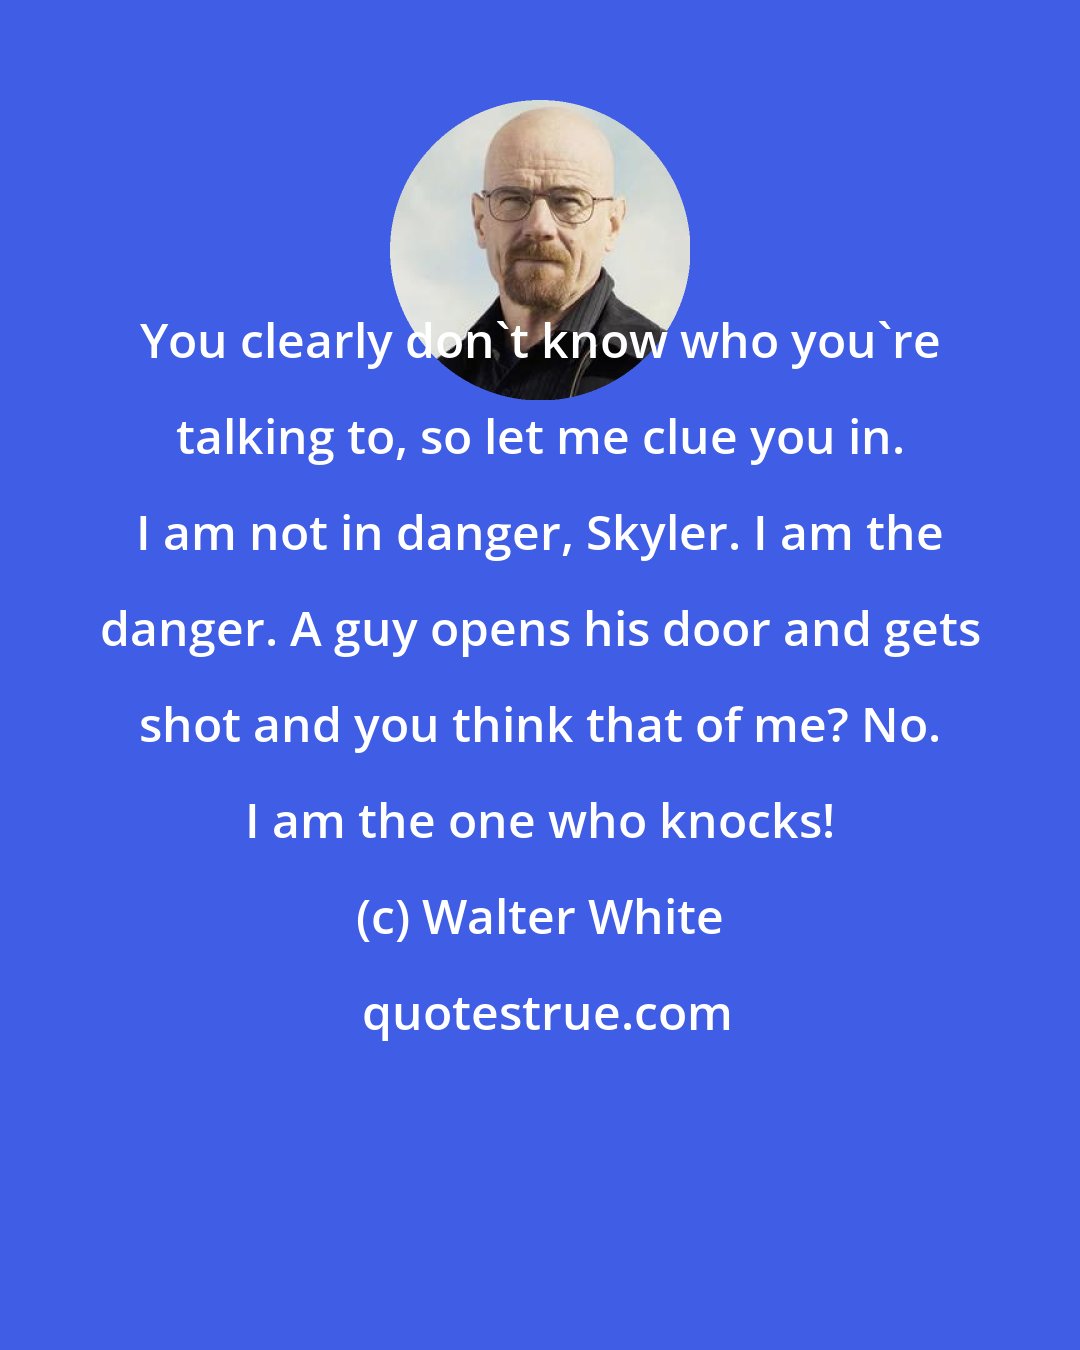 Walter White: You clearly don't know who you're talking to, so let me clue you in. I am not in danger, Skyler. I am the danger. A guy opens his door and gets shot and you think that of me? No. I am the one who knocks!